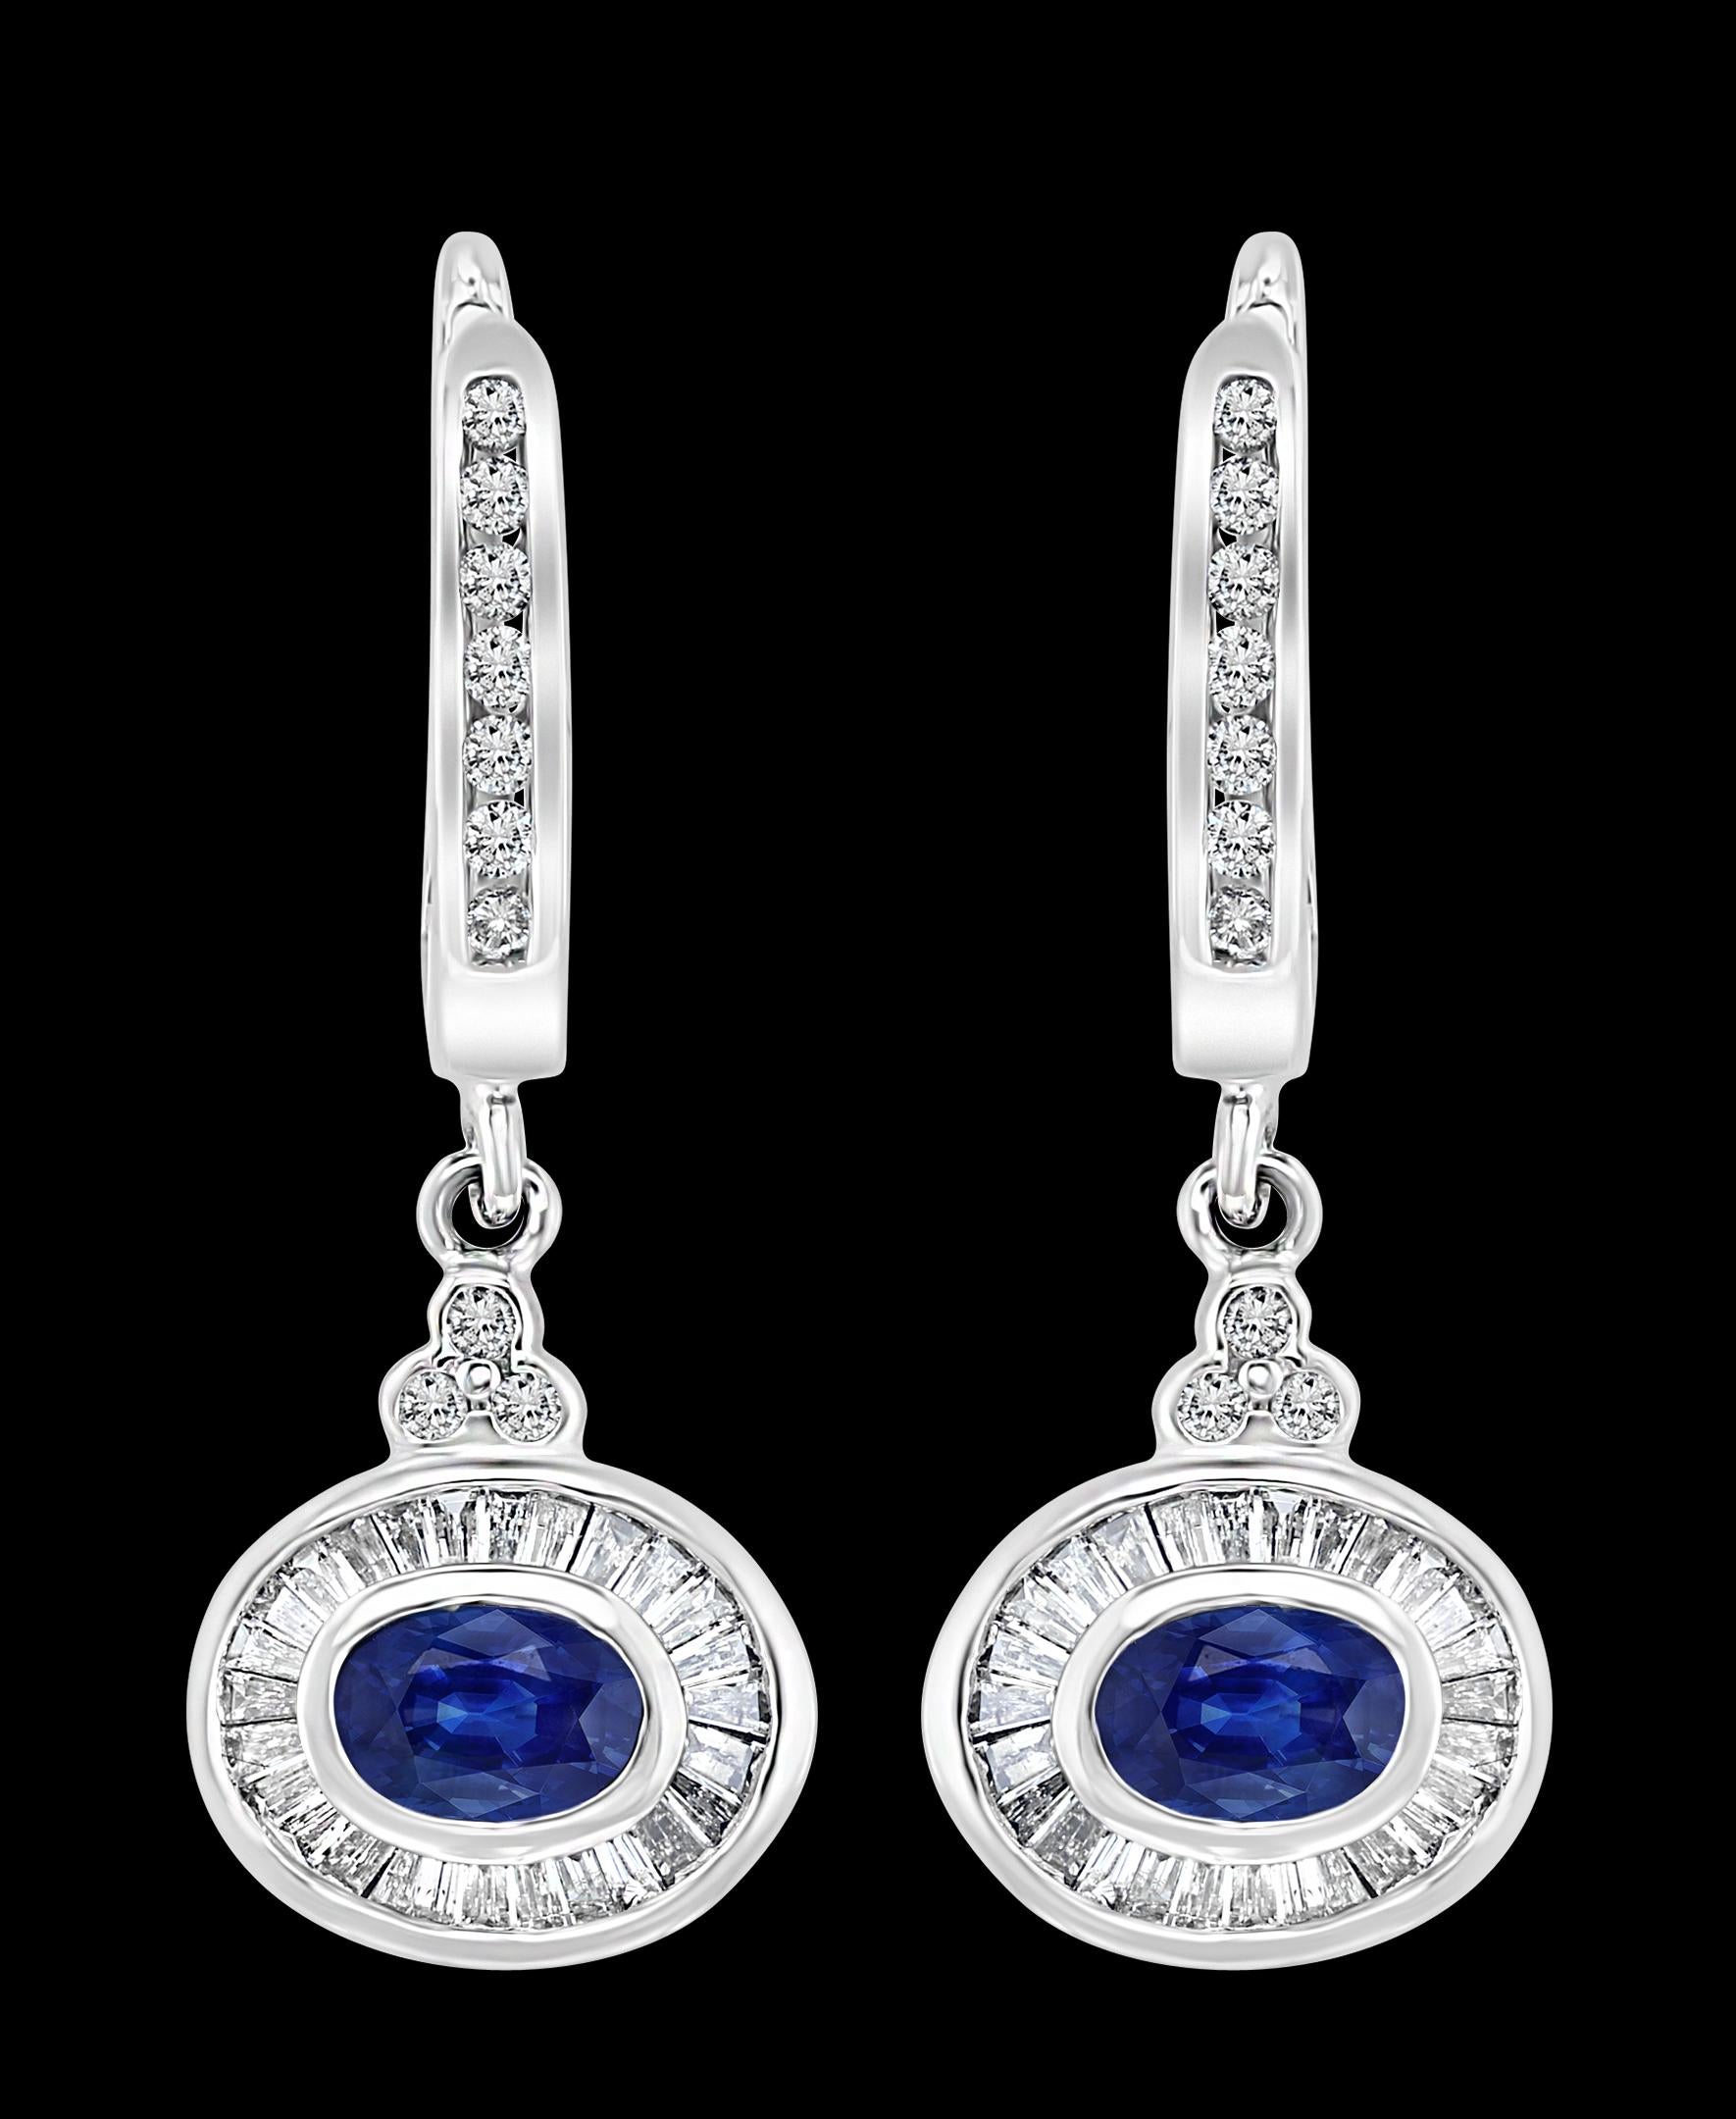 Approximately 0.7 Ct Natural Blue Sapphire and 0.75 Ct Diamond Huggie Earrings  14 Karat Gold 
A fabulous pair of earrings with an enormous amount of look and sparkle!
Set  in  14 Karat white gold
Weight of gold 5.4  Grams
The length of the earrings